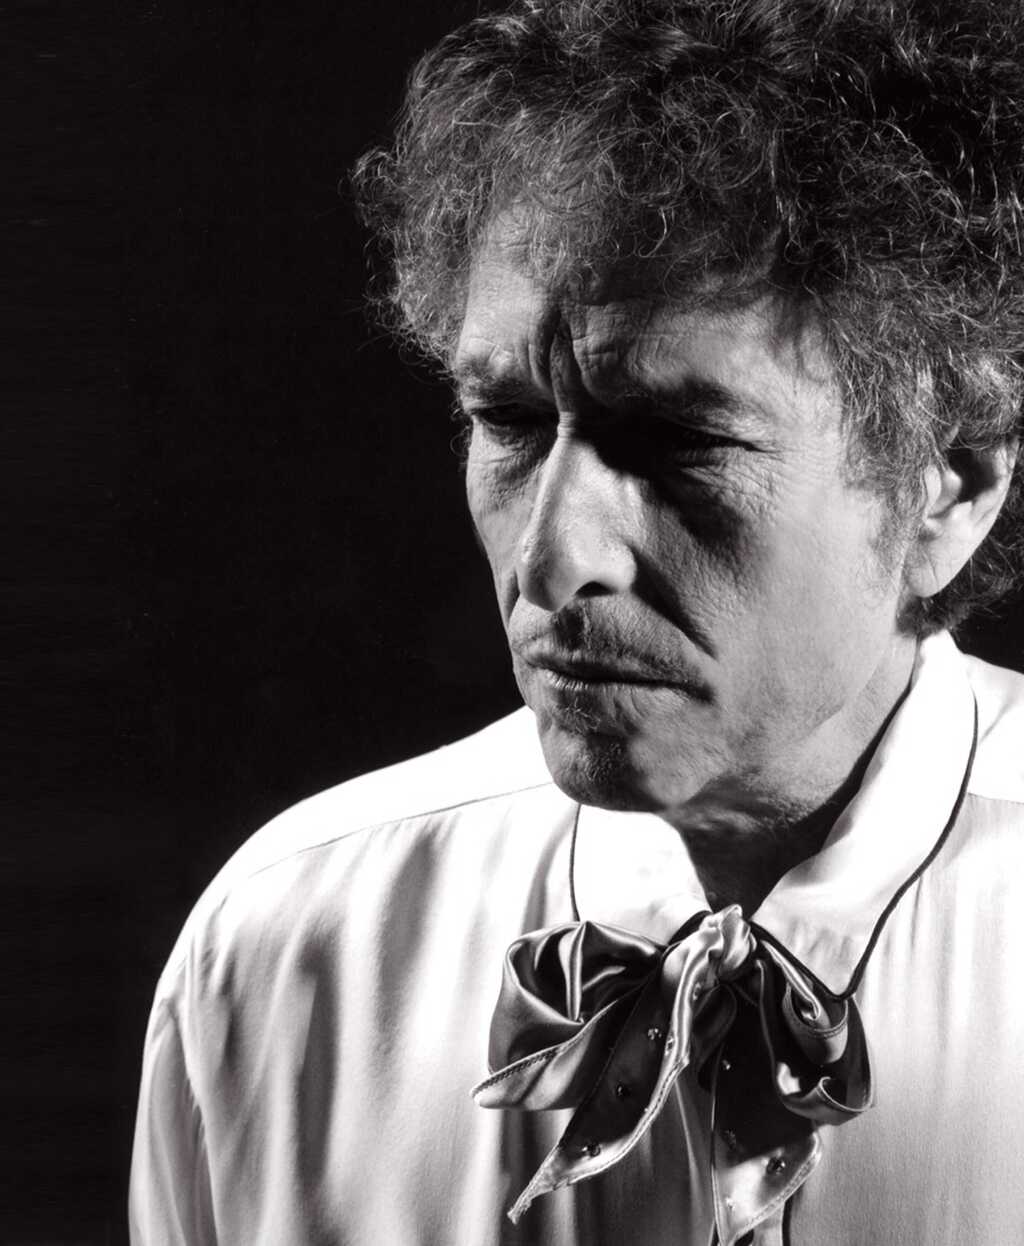 Bob Dylan Talks Music, Religion and More in New Interview with ‘The Wall Street Journal’